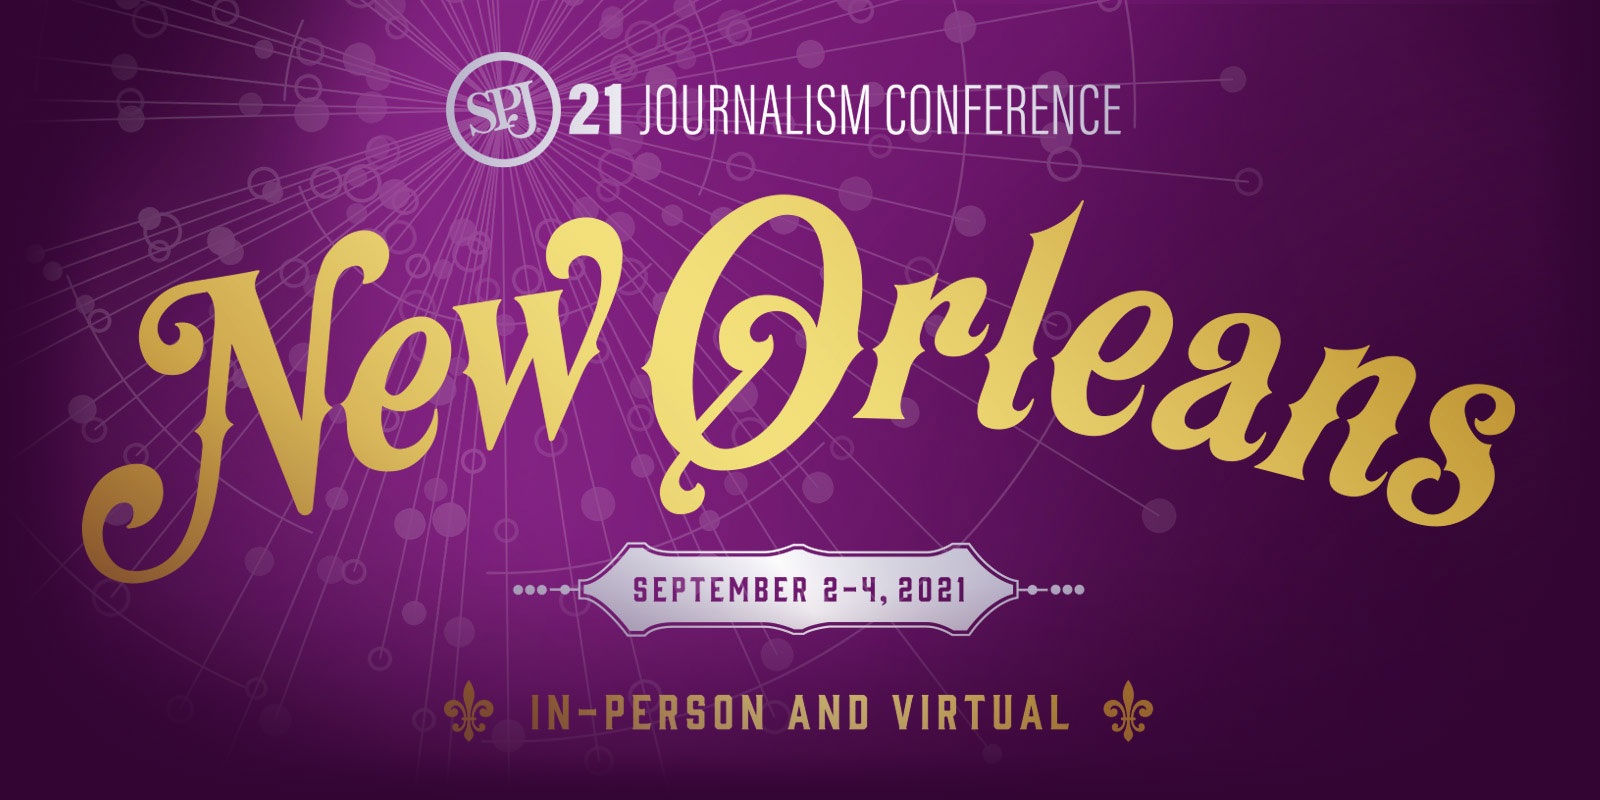 Travel grants available for national SPJ conference in New Orleans